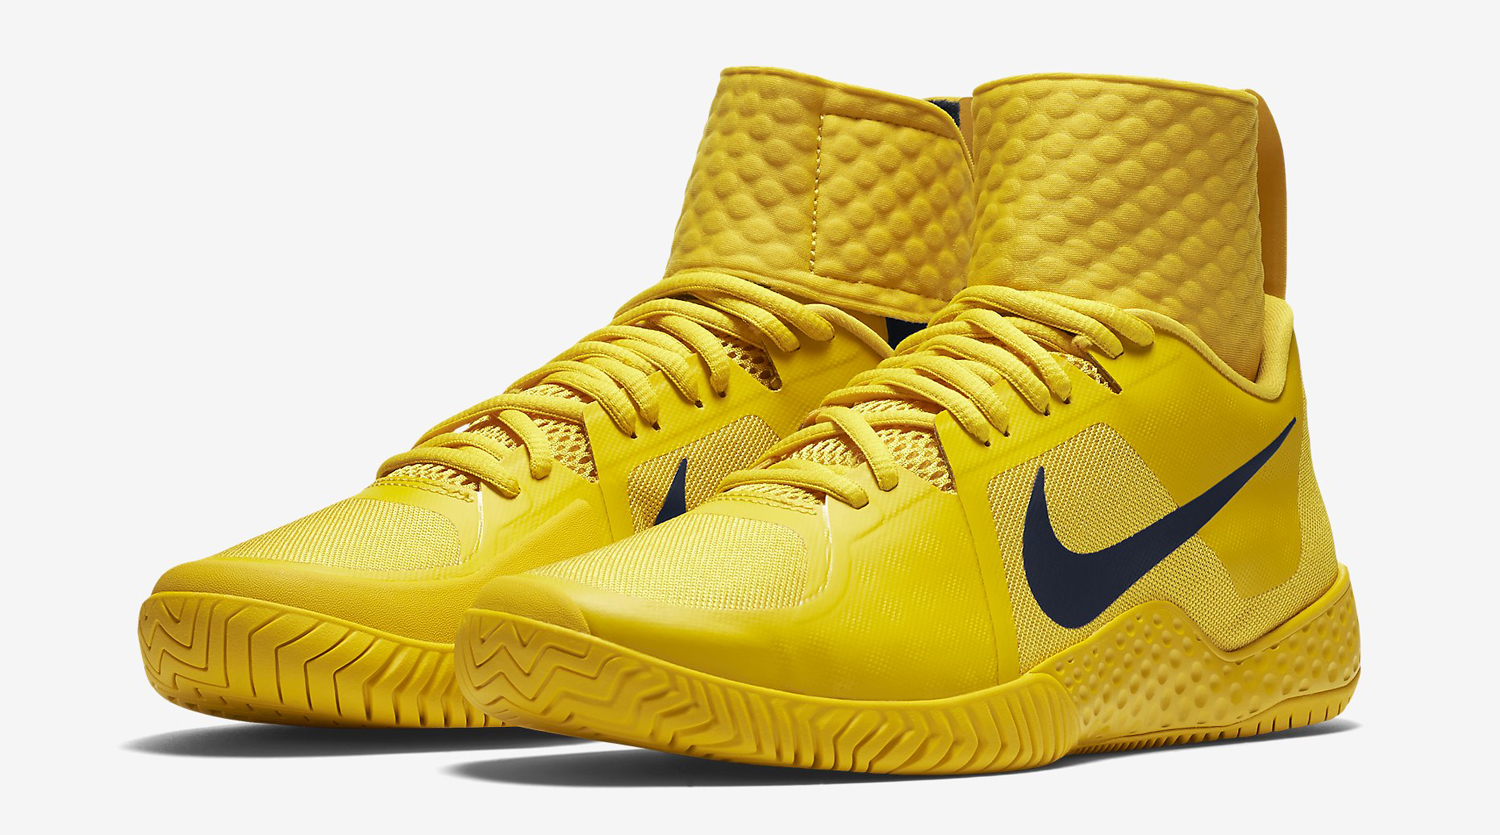 Nike Made Bruce Lee Sneakers for Serena Williams | Sole Collector